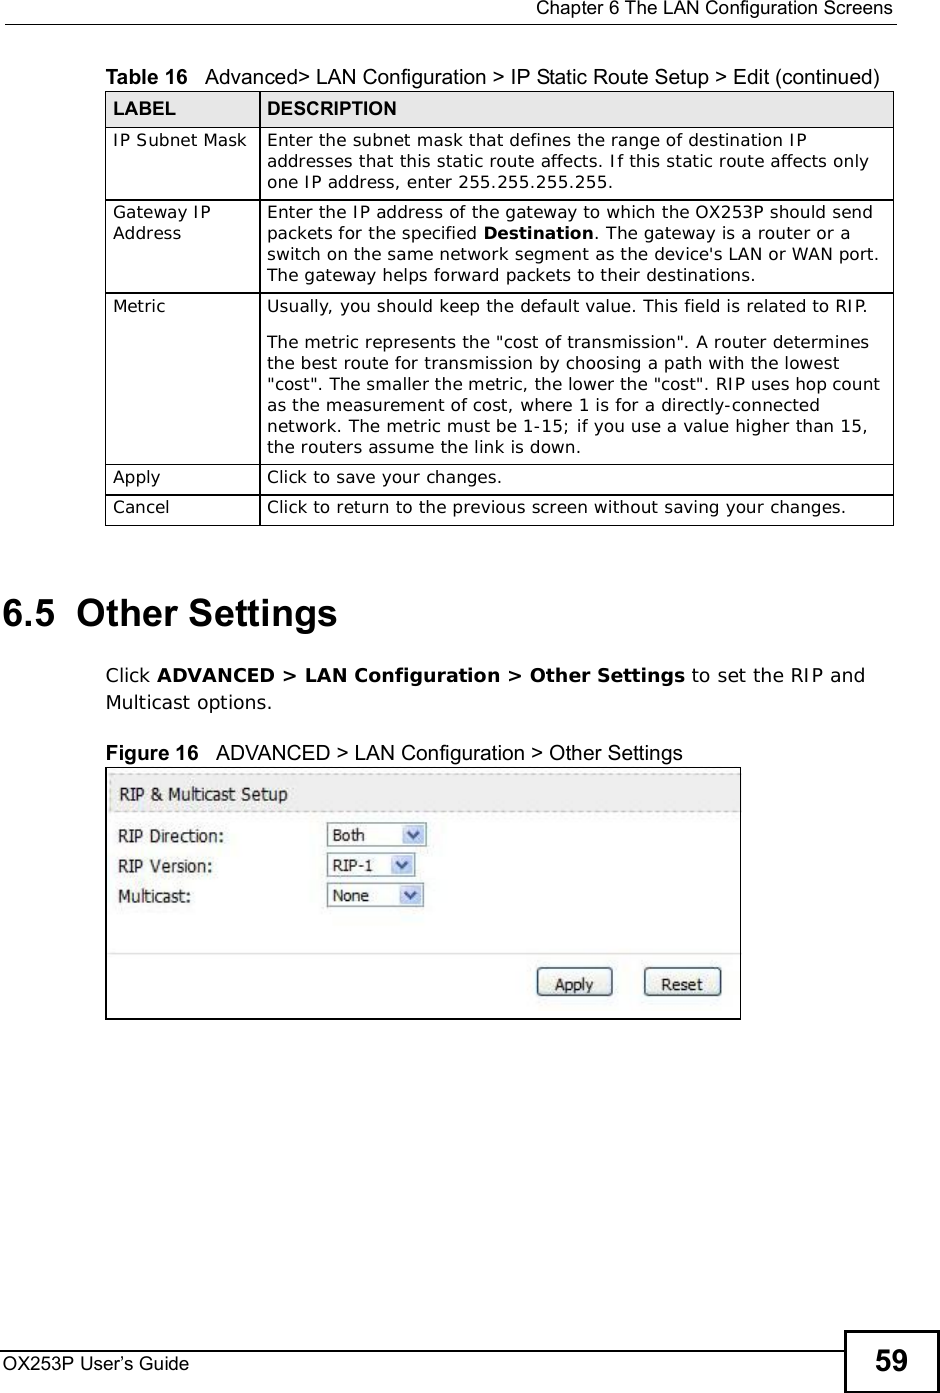  Chapter 6The LAN Configuration ScreensOX253P User’s Guide 596.5  Other SettingsClick ADVANCED &gt; LAN Configuration &gt; Other Settings to set the RIP and Multicast options.Figure 16   ADVANCED &gt; LAN Configuration &gt; Other SettingsIP Subnet Mask Enter the subnet mask that defines the range of destination IP addresses that this static route affects. If this static route affects only one IP address, enter 255.255.255.255.Gateway IP Address Enter the IP address of the gateway to which the OX253P should send packets for the specified Destination. The gateway is a router or a switch on the same network segment as the device&apos;s LAN or WAN port. The gateway helps forward packets to their destinations.Metric Usually, you should keep the default value. This field is related to RIP.The metric represents the &quot;cost of transmission&quot;. A router determines the best route for transmission by choosing a path with the lowest &quot;cost&quot;. The smaller the metric, the lower the &quot;cost&quot;. RIP uses hop count as the measurement of cost, where 1 is for a directly-connected network. The metric must be 1-15; if you use a value higher than 15, the routers assume the link is down.Apply Click to save your changes.Cancel Click to return to the previous screen without saving your changes.Table 16   Advanced&gt; LAN Configuration &gt; IP Static Route Setup &gt; Edit (continued)LABEL DESCRIPTION